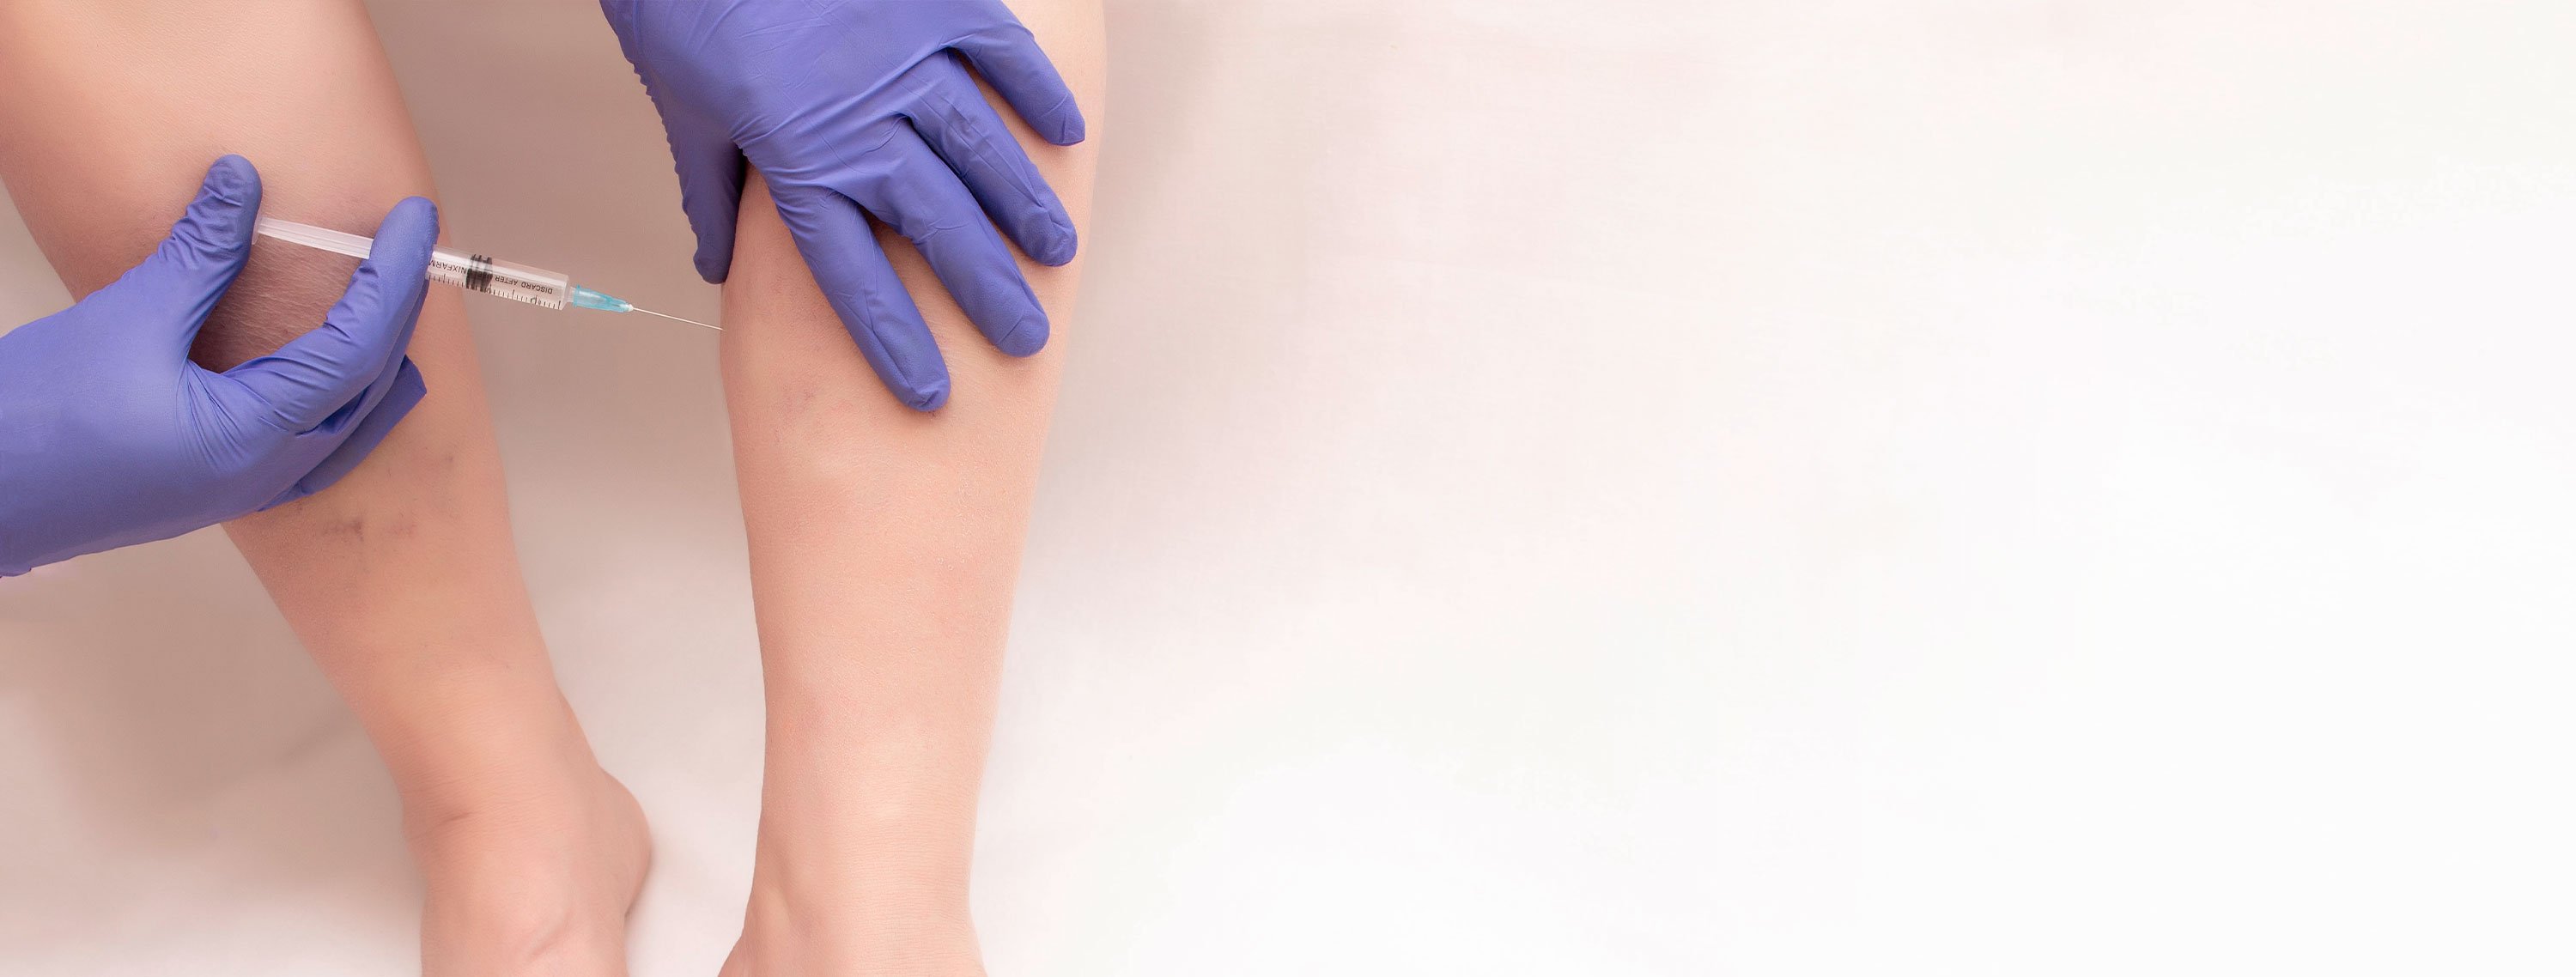 Sclerotherapy being done on patients leg